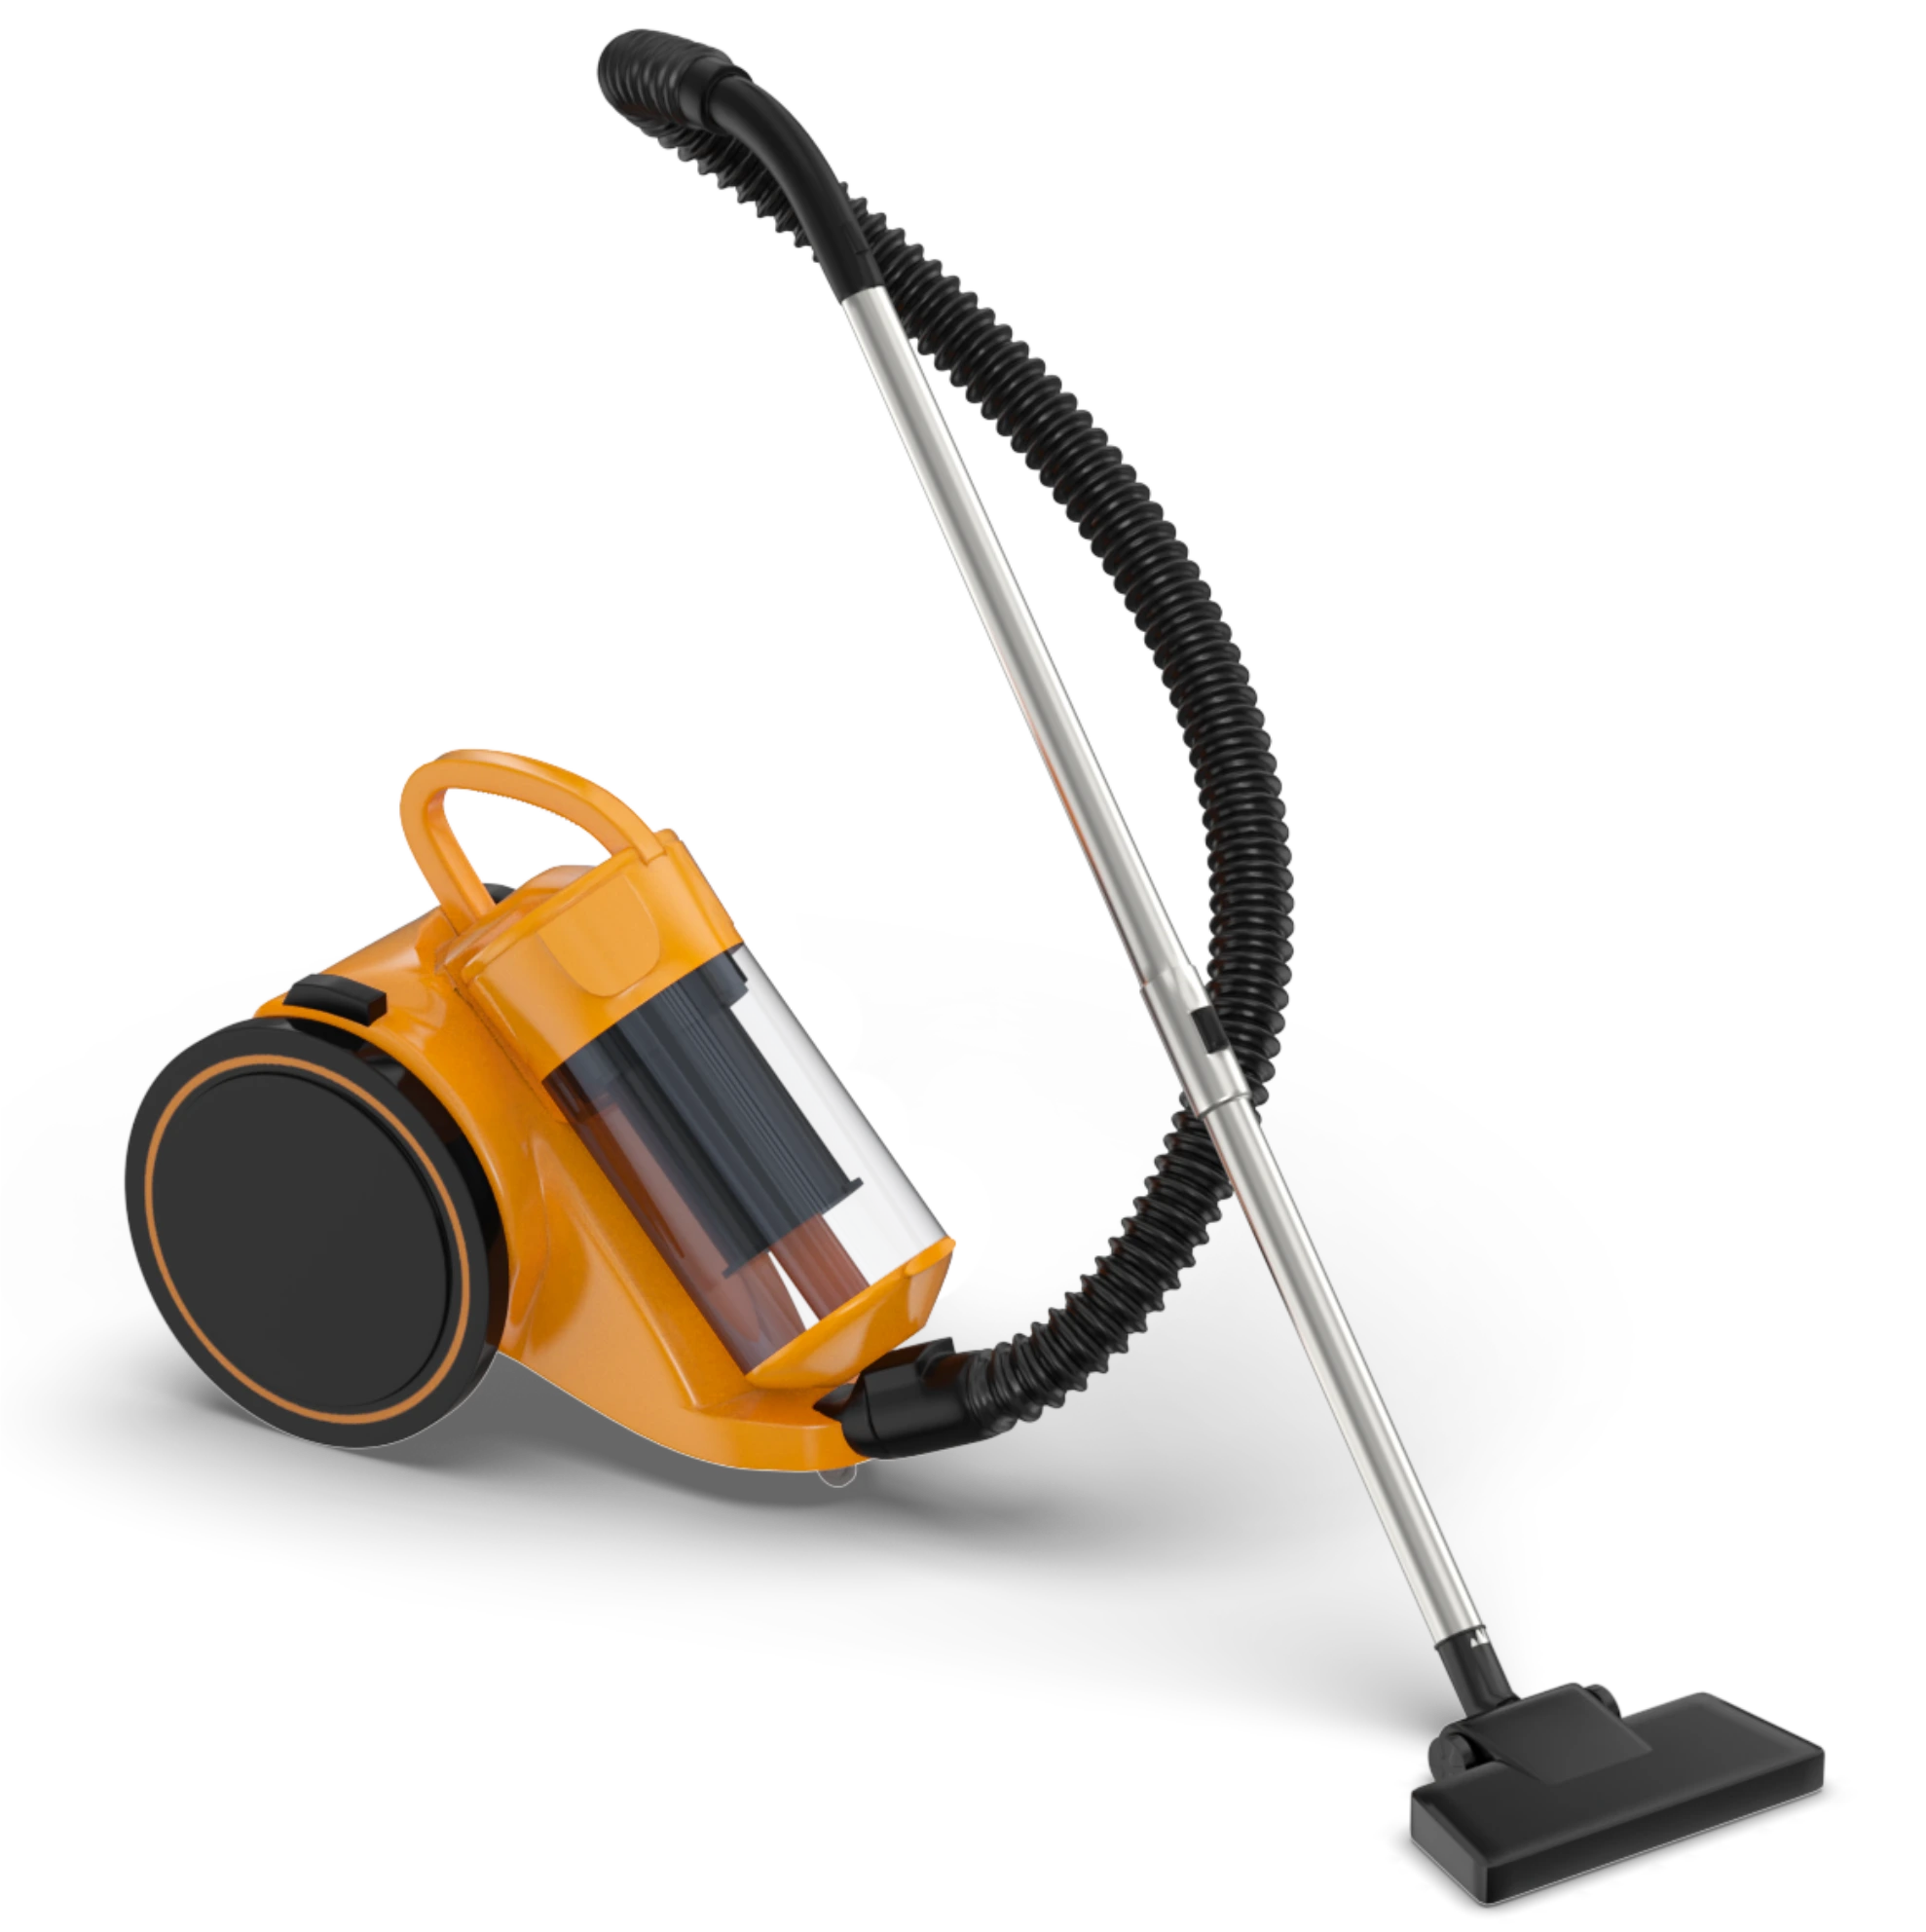 3D Rendered yellow vaccuum cleaner image